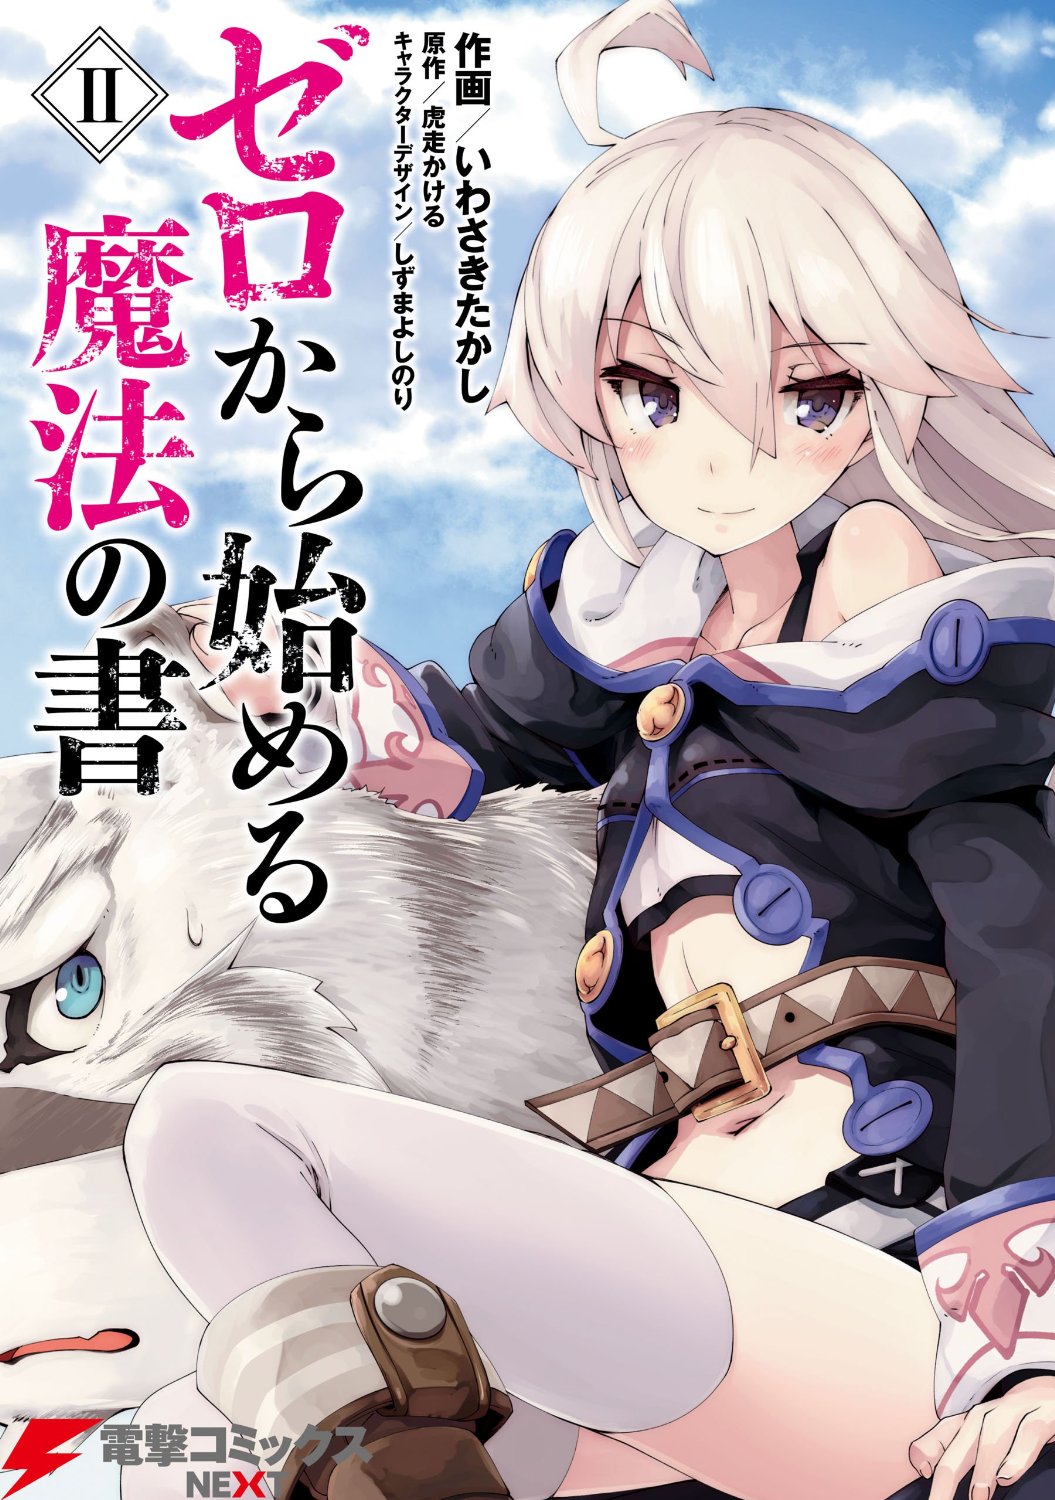 1boy 1girl ahoge ankle_boots arm_rest belt blue_eyes blue_sky blush boots brown_boots carrying clouds coat collarbone cover cover_page creature dengeki_bunko eyebrows eyebrows_visible_through_hair furry highres hood hood_down iwasaki_takashi long_hair long_sleeves looking_at_another looking_at_viewer mercenary_(zero_kara_hajimeru_mahou_no_sho) midriff mouth navel off_shoulder open outdoors short_shorts shorts shoulder_carry sitting sky stomach sweatdrop thigh-highs title violet_eyes white_hair white_legwear zero_(zero_kara_hajimeru_mahou_no_sho) zero_kara_hajimeru_mahou_no_sho zettai_ryouiki